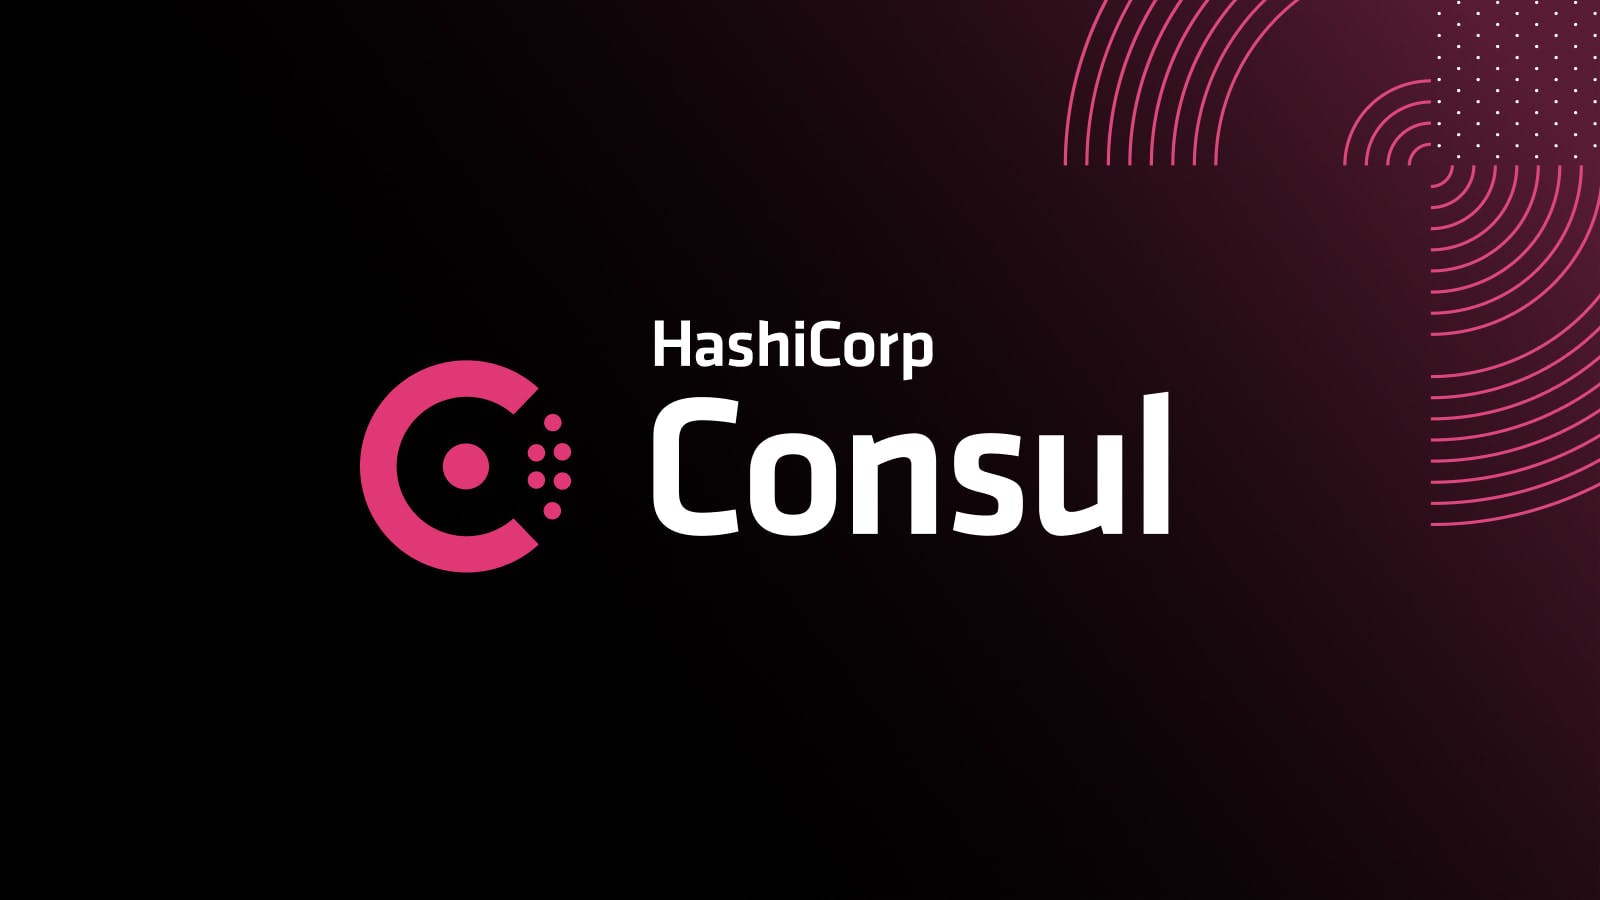 Consul 1.18 GA improves enterprise reliability with Long-Term Support